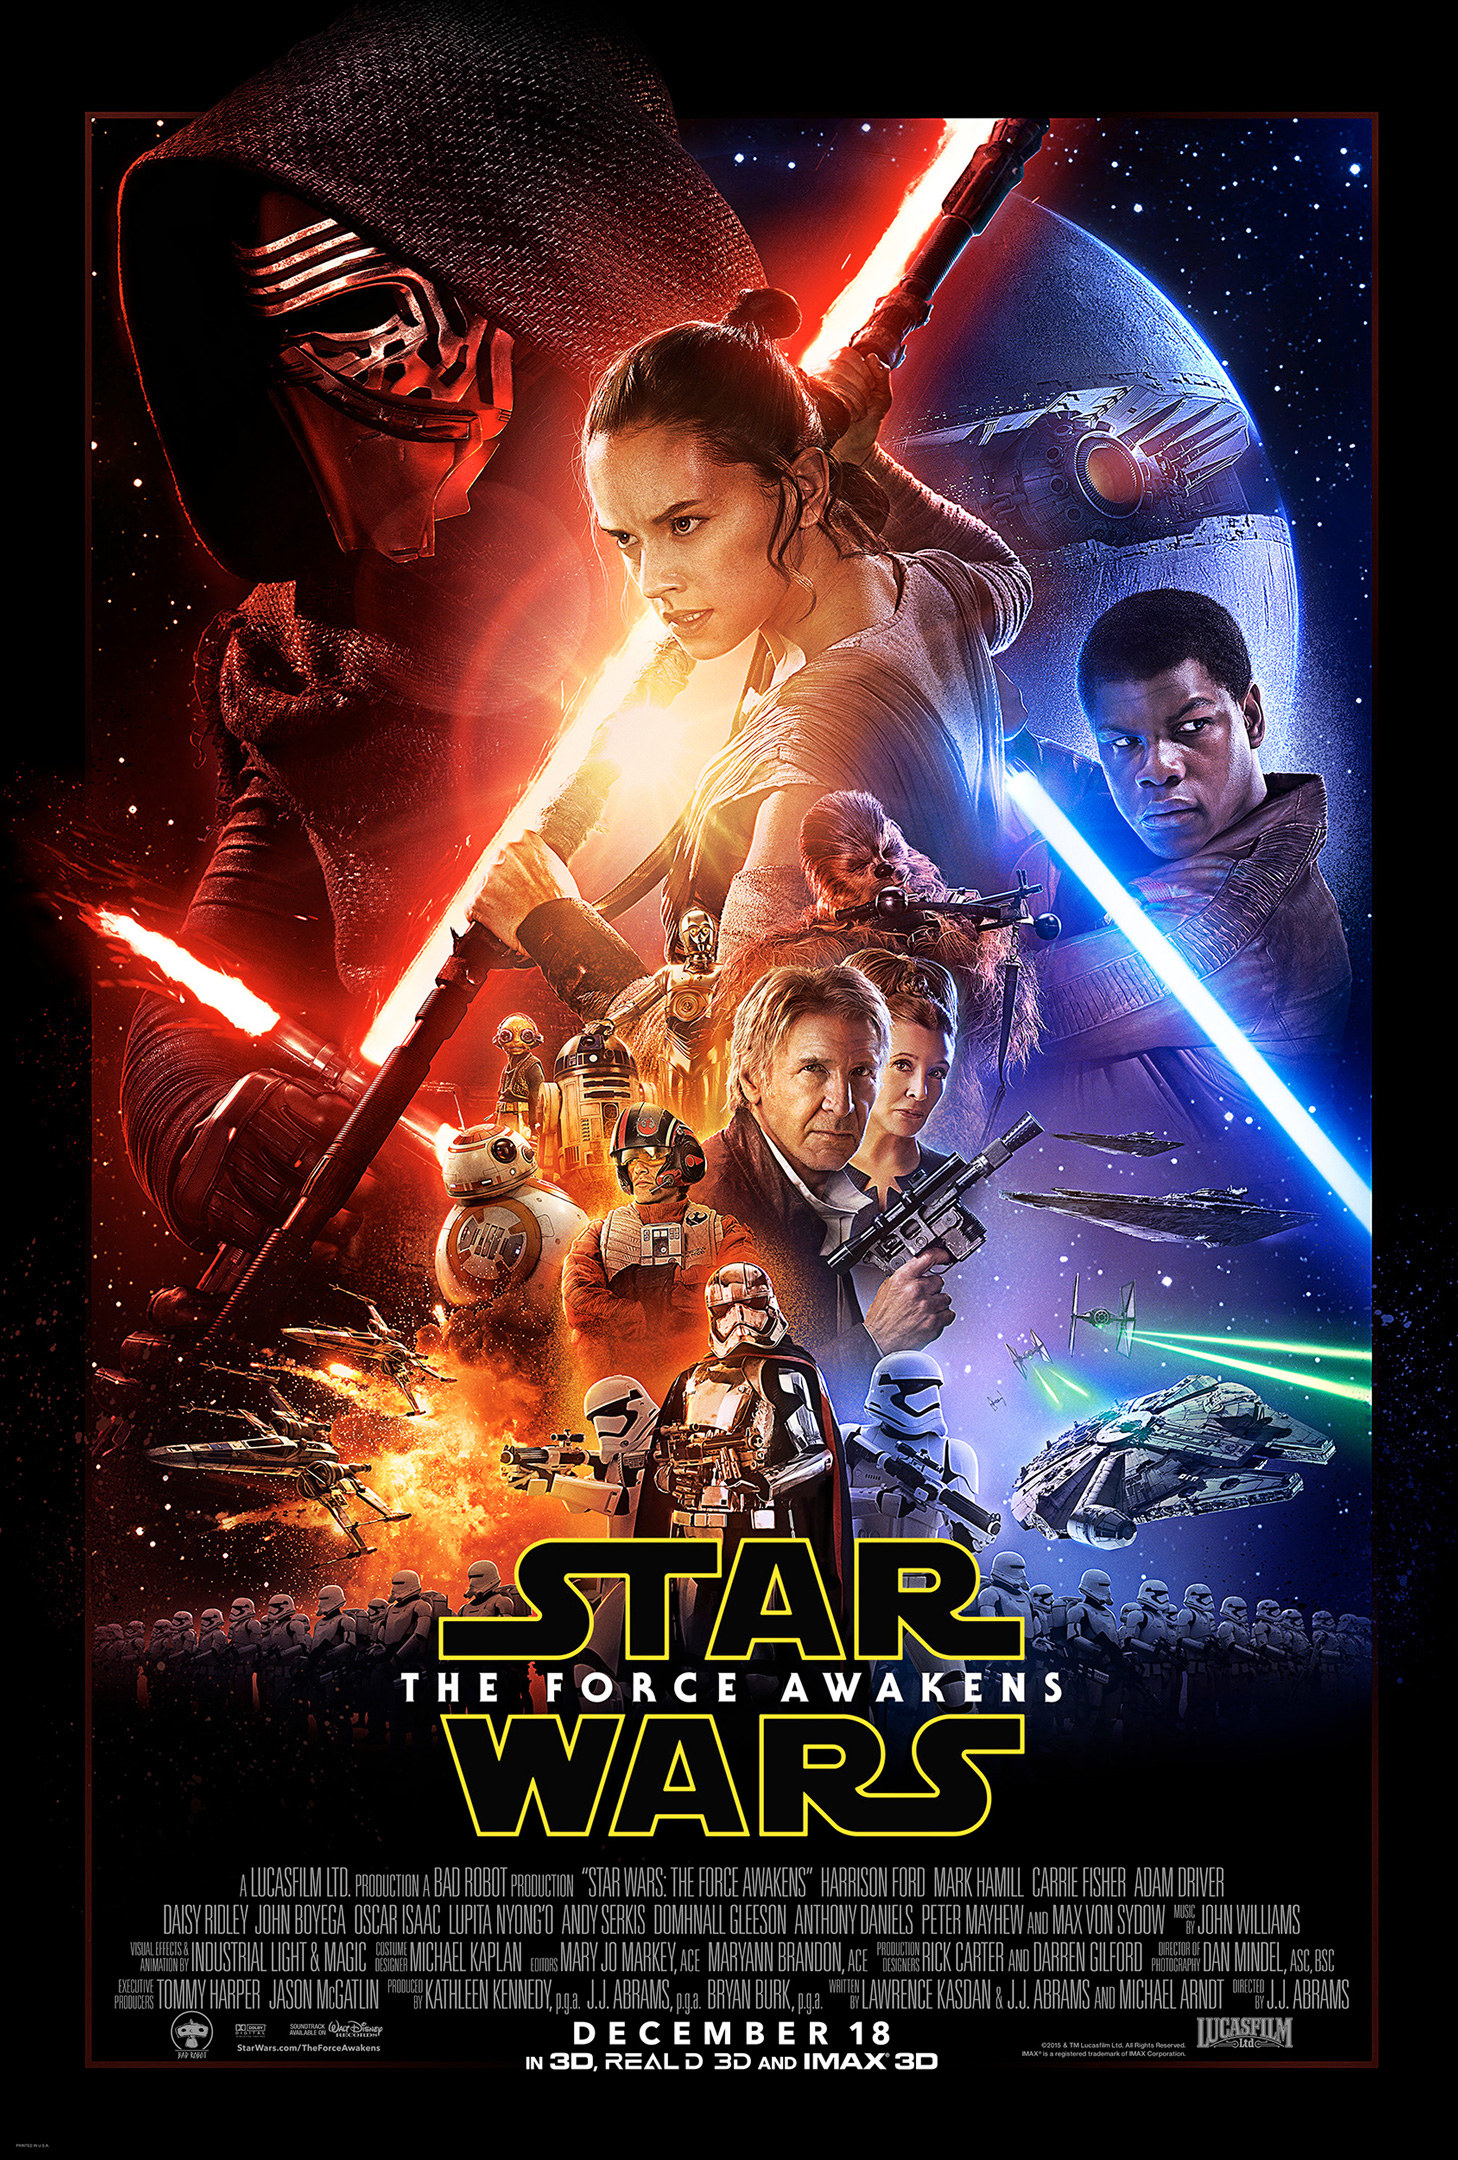 Final Star Wars The Force Awakens Poster Debuts But Where Is